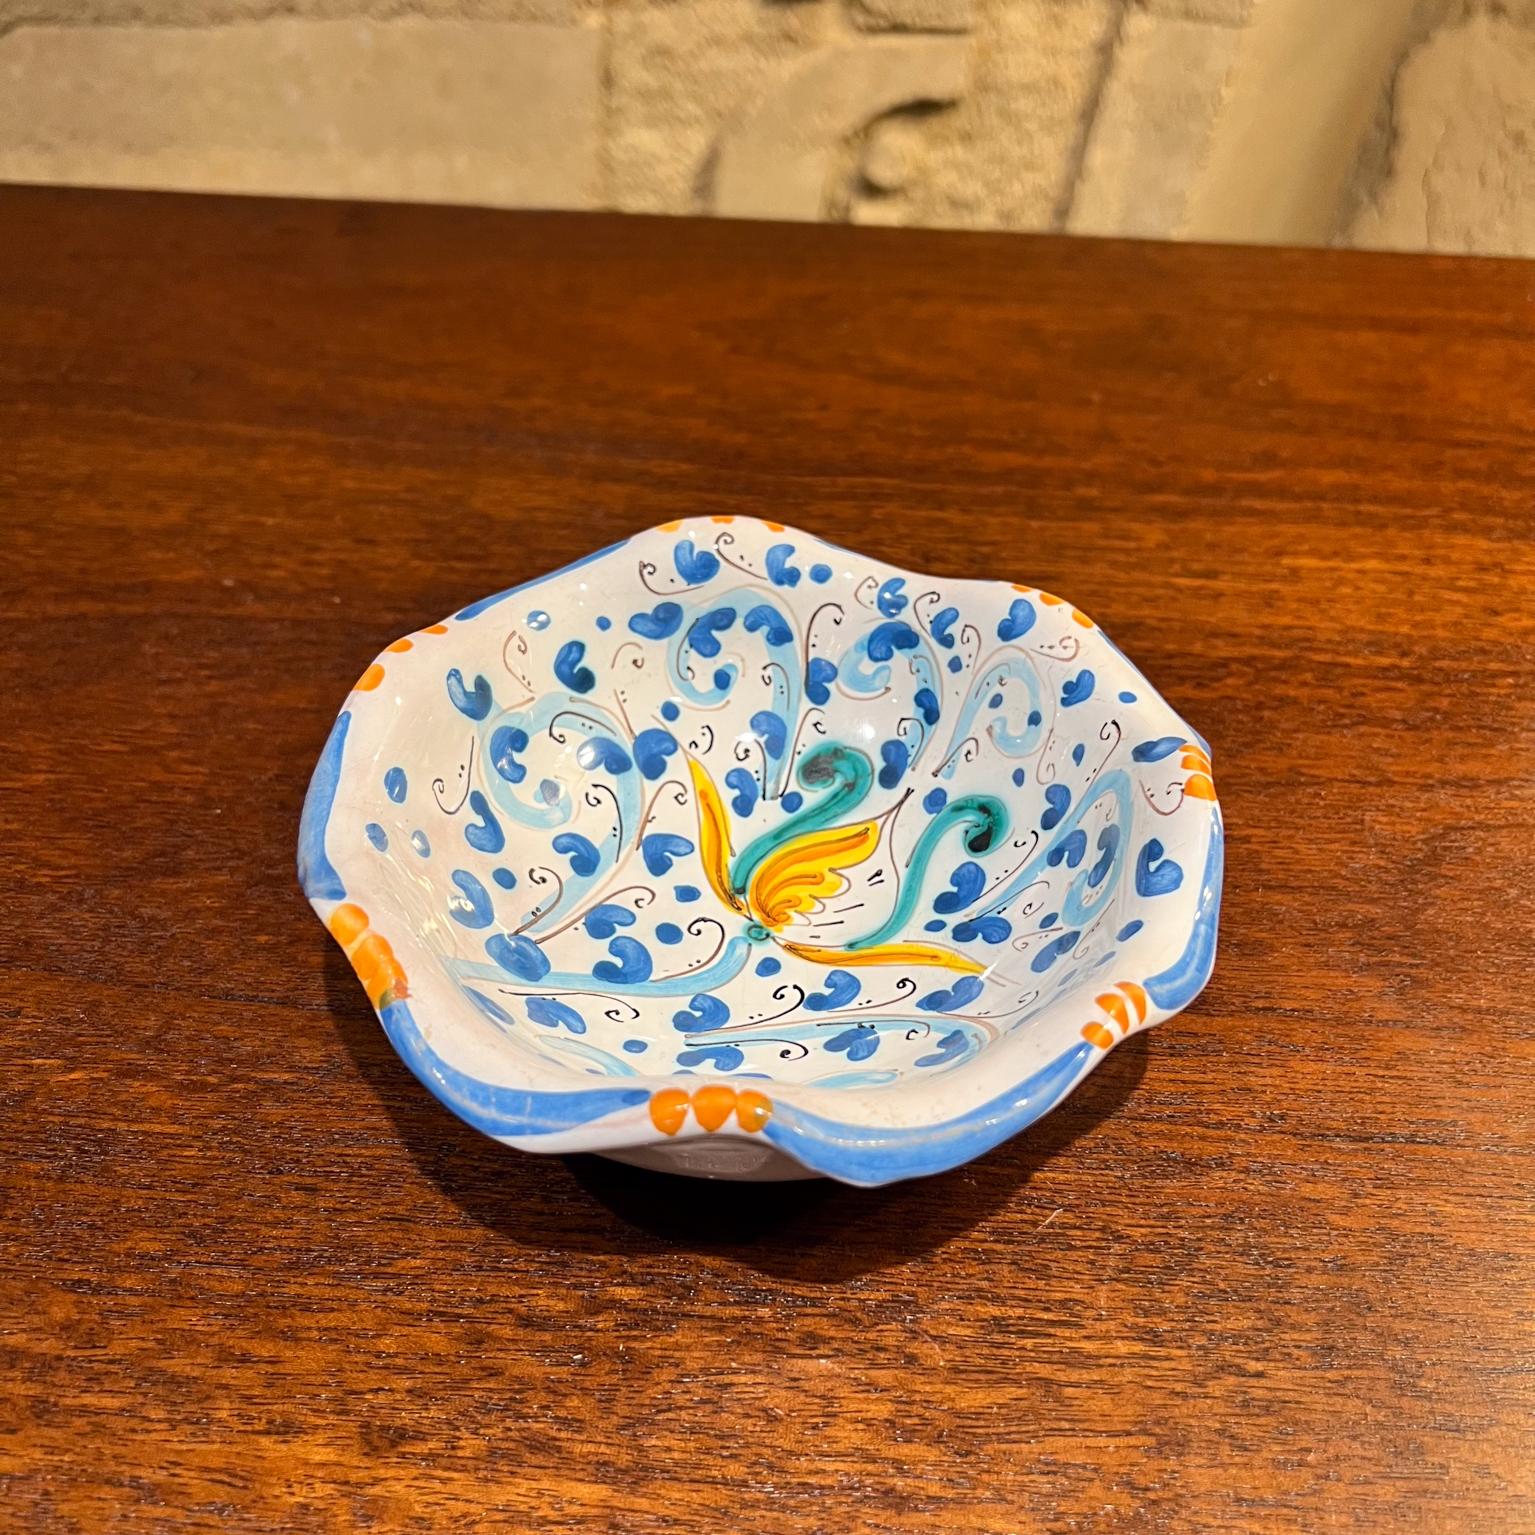 1960s Sicilian Hand Painted Blue Dish Art Pottery Caltagirone Italy In Good Condition For Sale In Chula Vista, CA